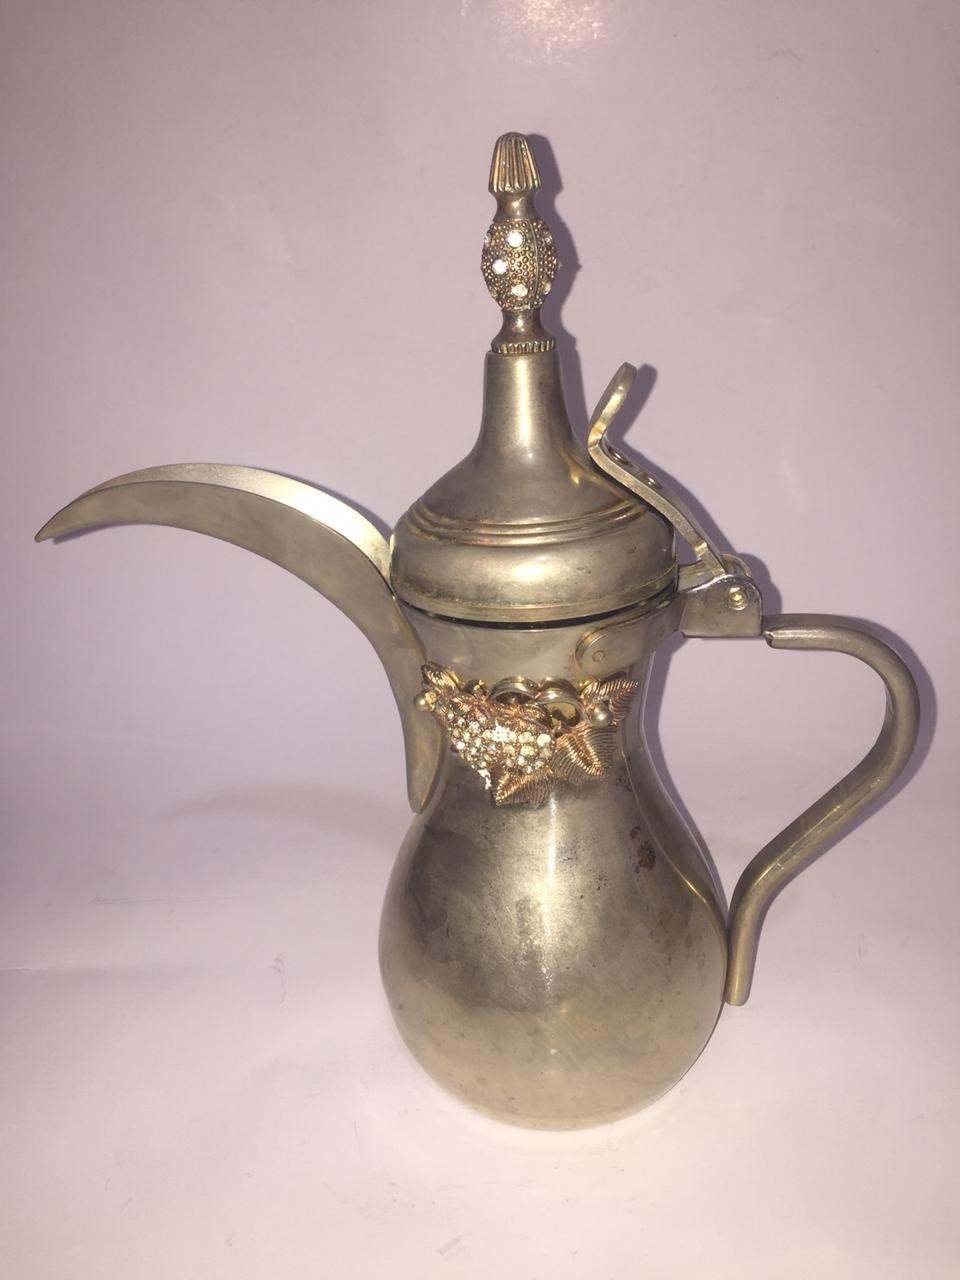 Primary image for Vintage Stainless Steel arabic tea coffee pot dallah18-8 Korea made with strawbe